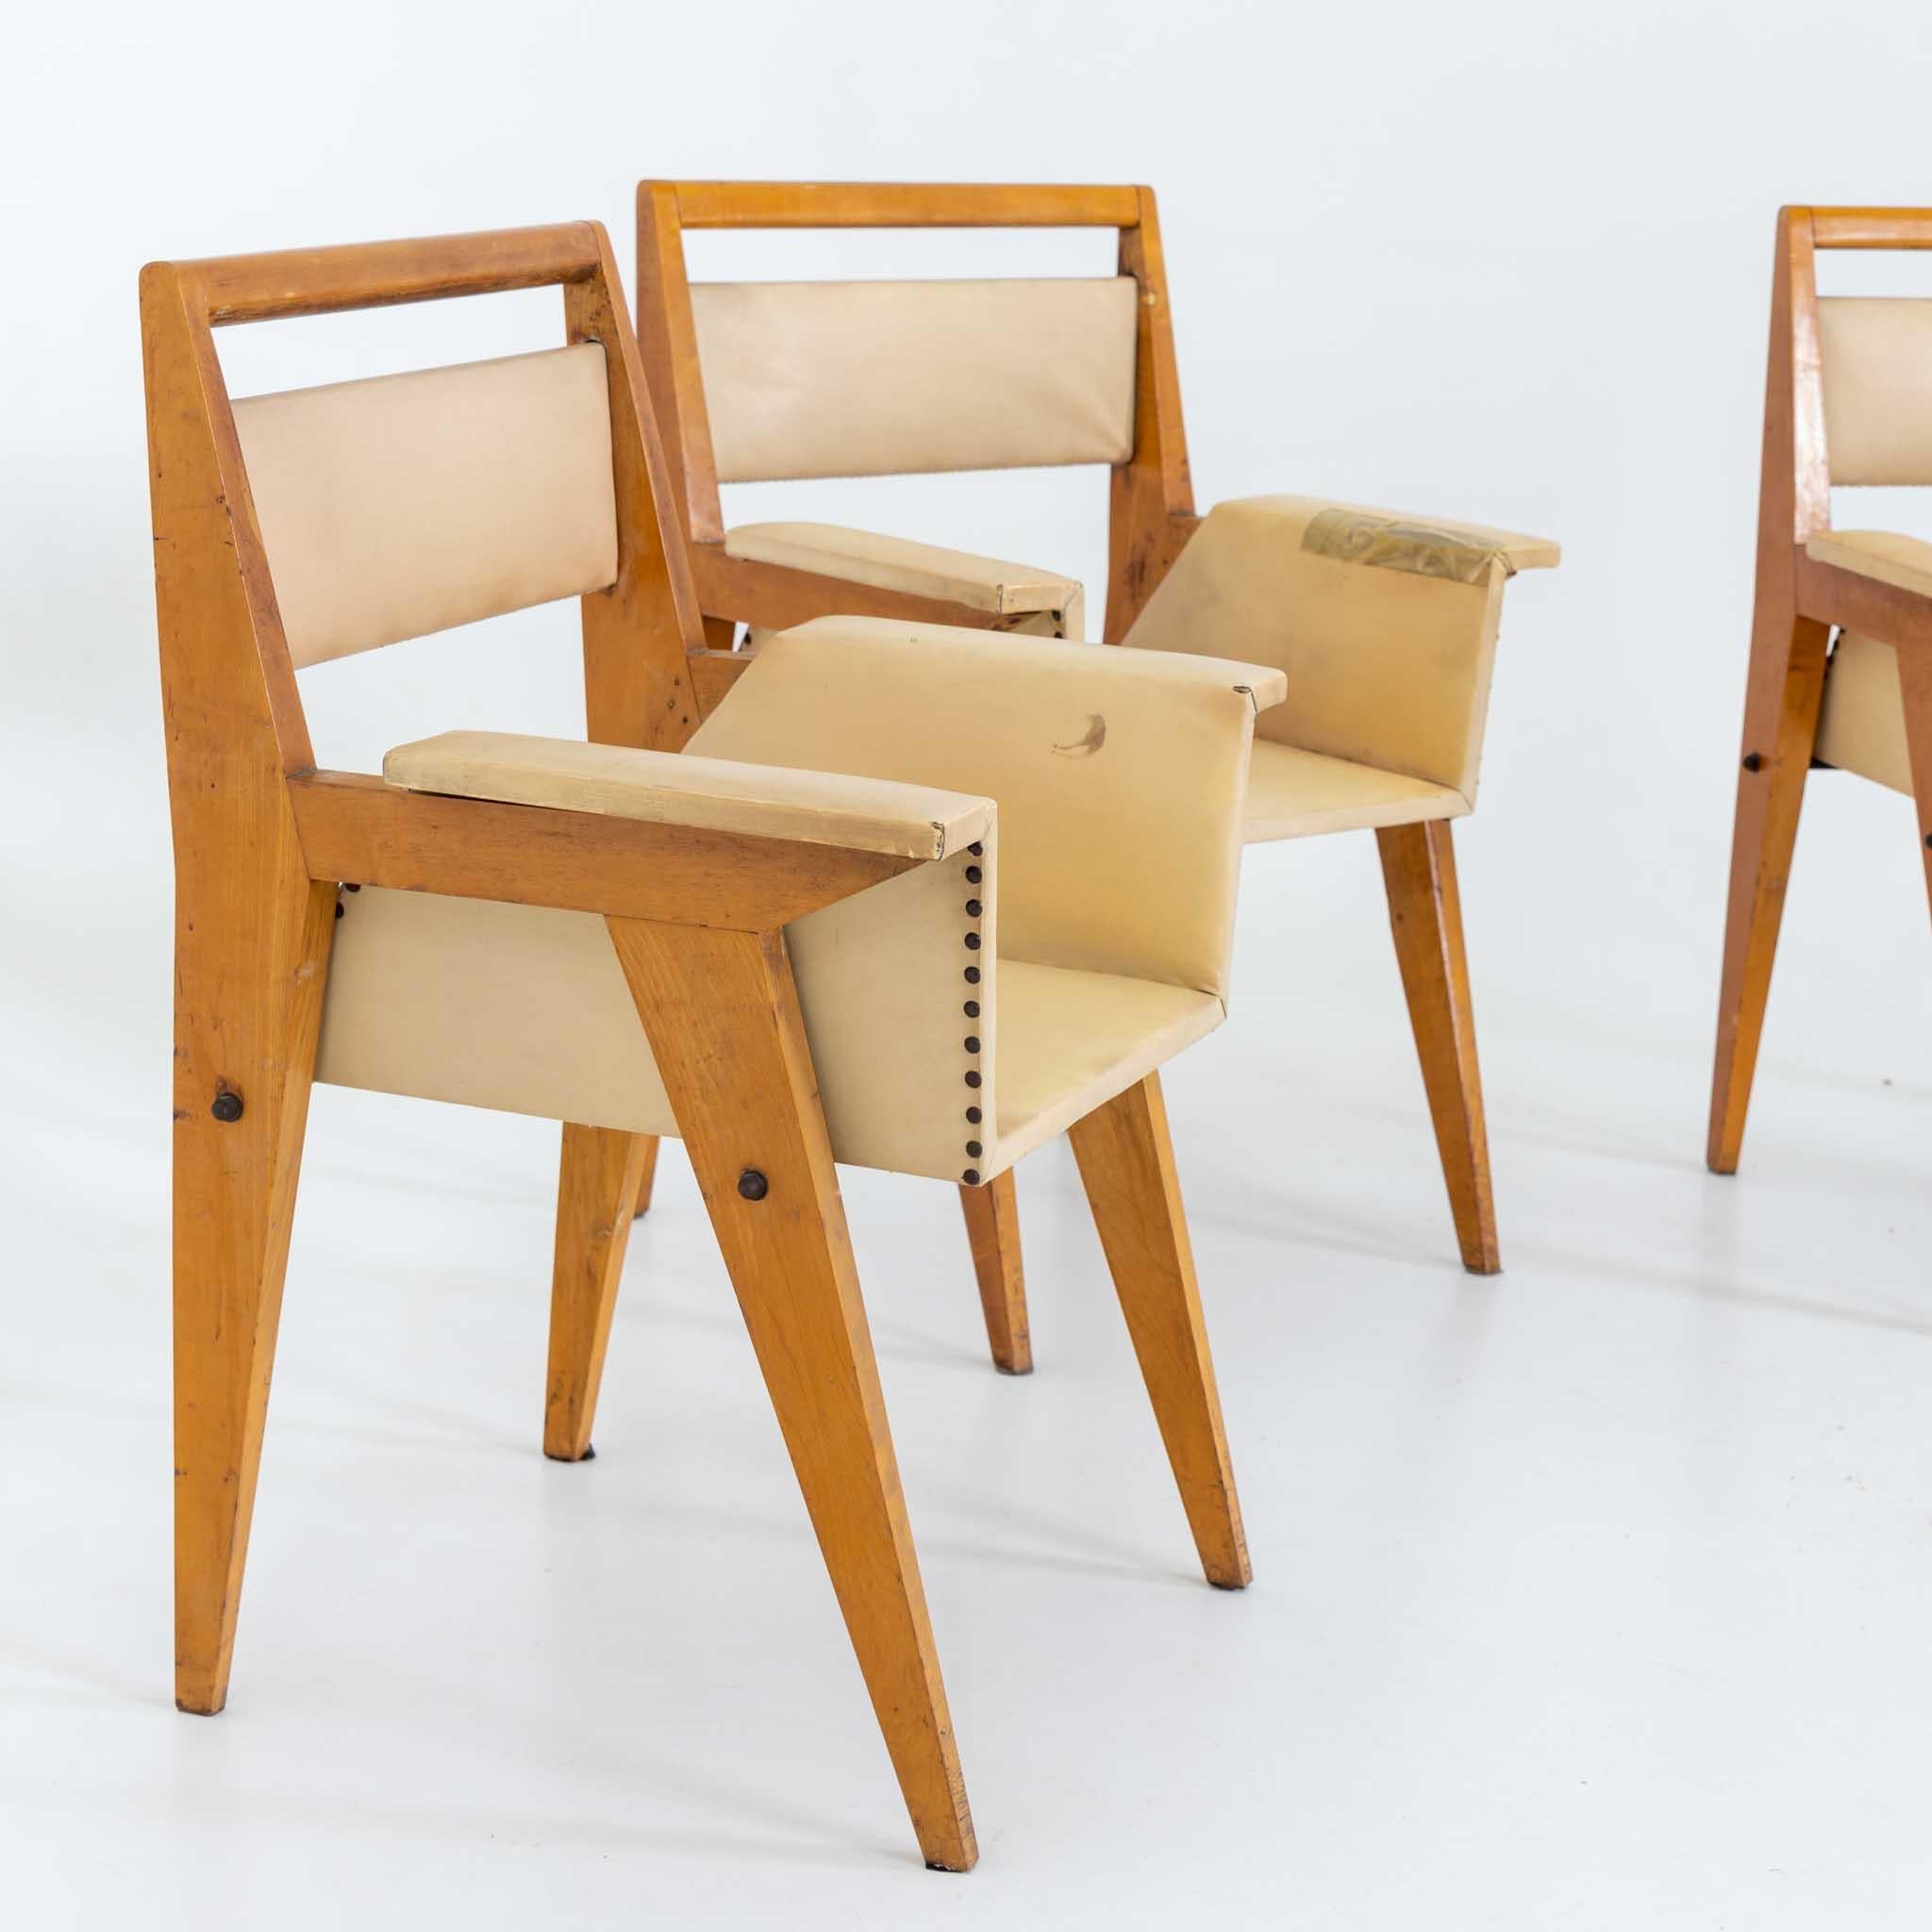 Modern Armchairs, Designed by Vittorio Armellini, Italy Mid-20th Century For Sale